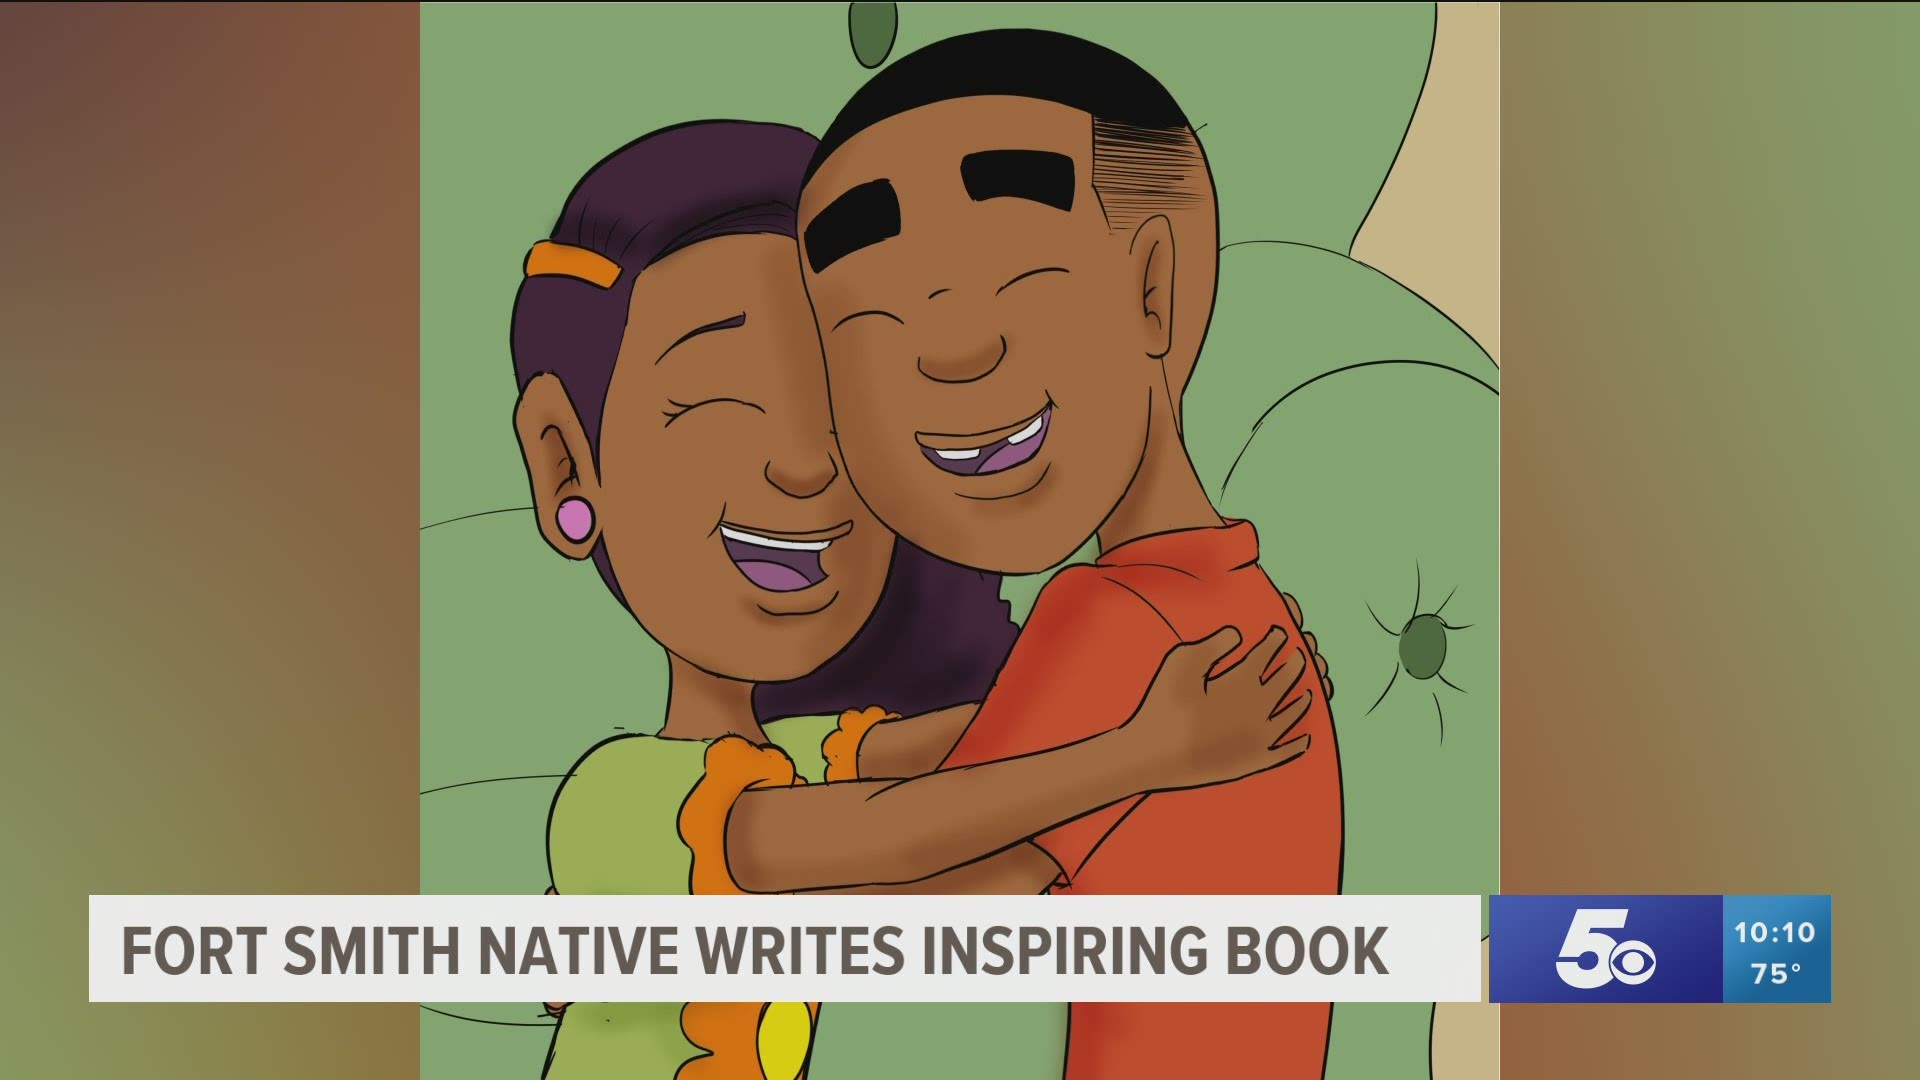 The author of "Little Man" says it's a book about encouraging young black boys to appreciate the skin they are in.